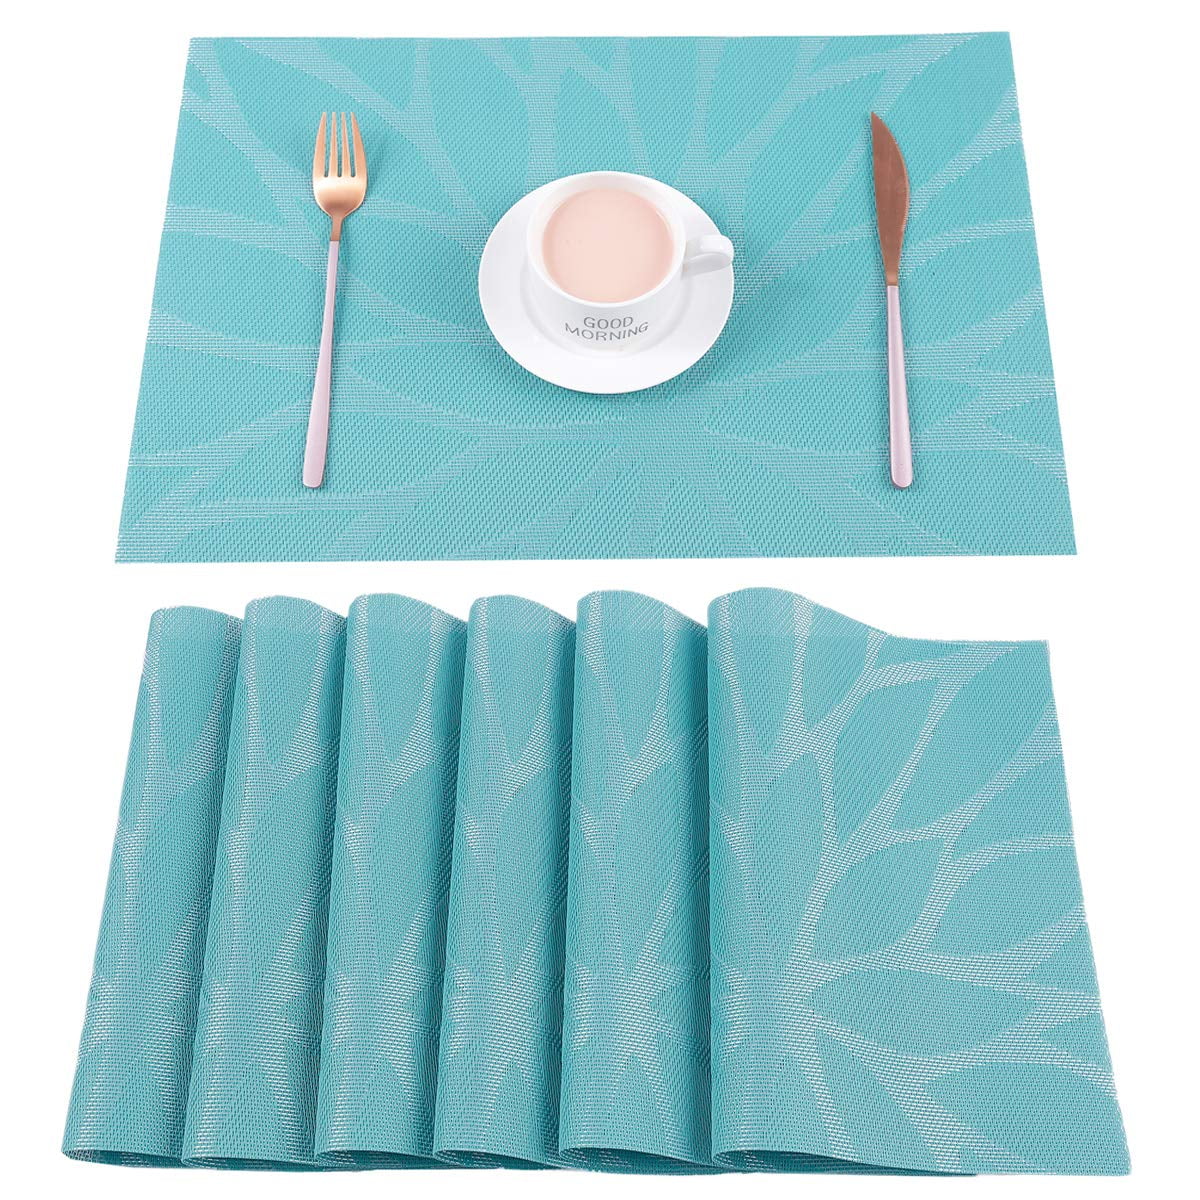 6 Pack Large Round Placemats Gradient Braided Non-Slip Heat Resistant Table Mats